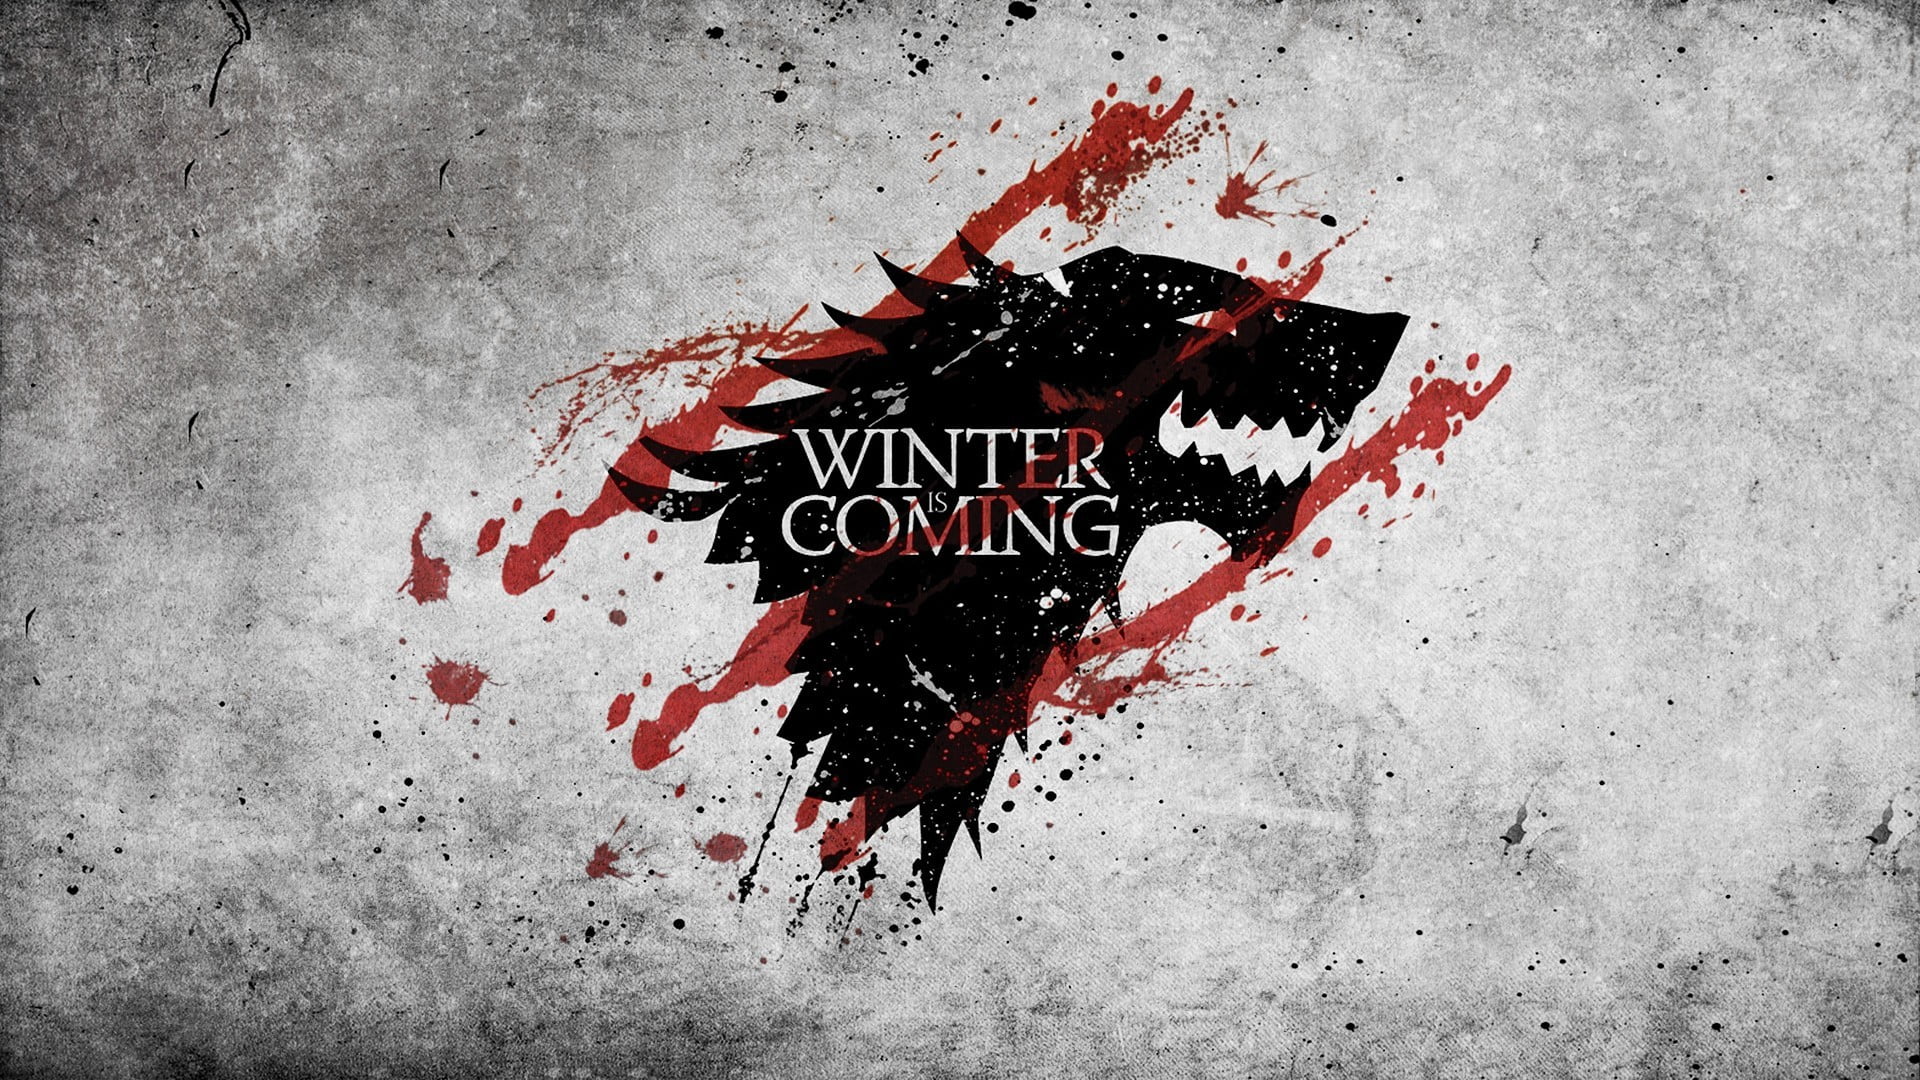 Winter is Coming game of thrones House Stark logo, Game of Thrones ...